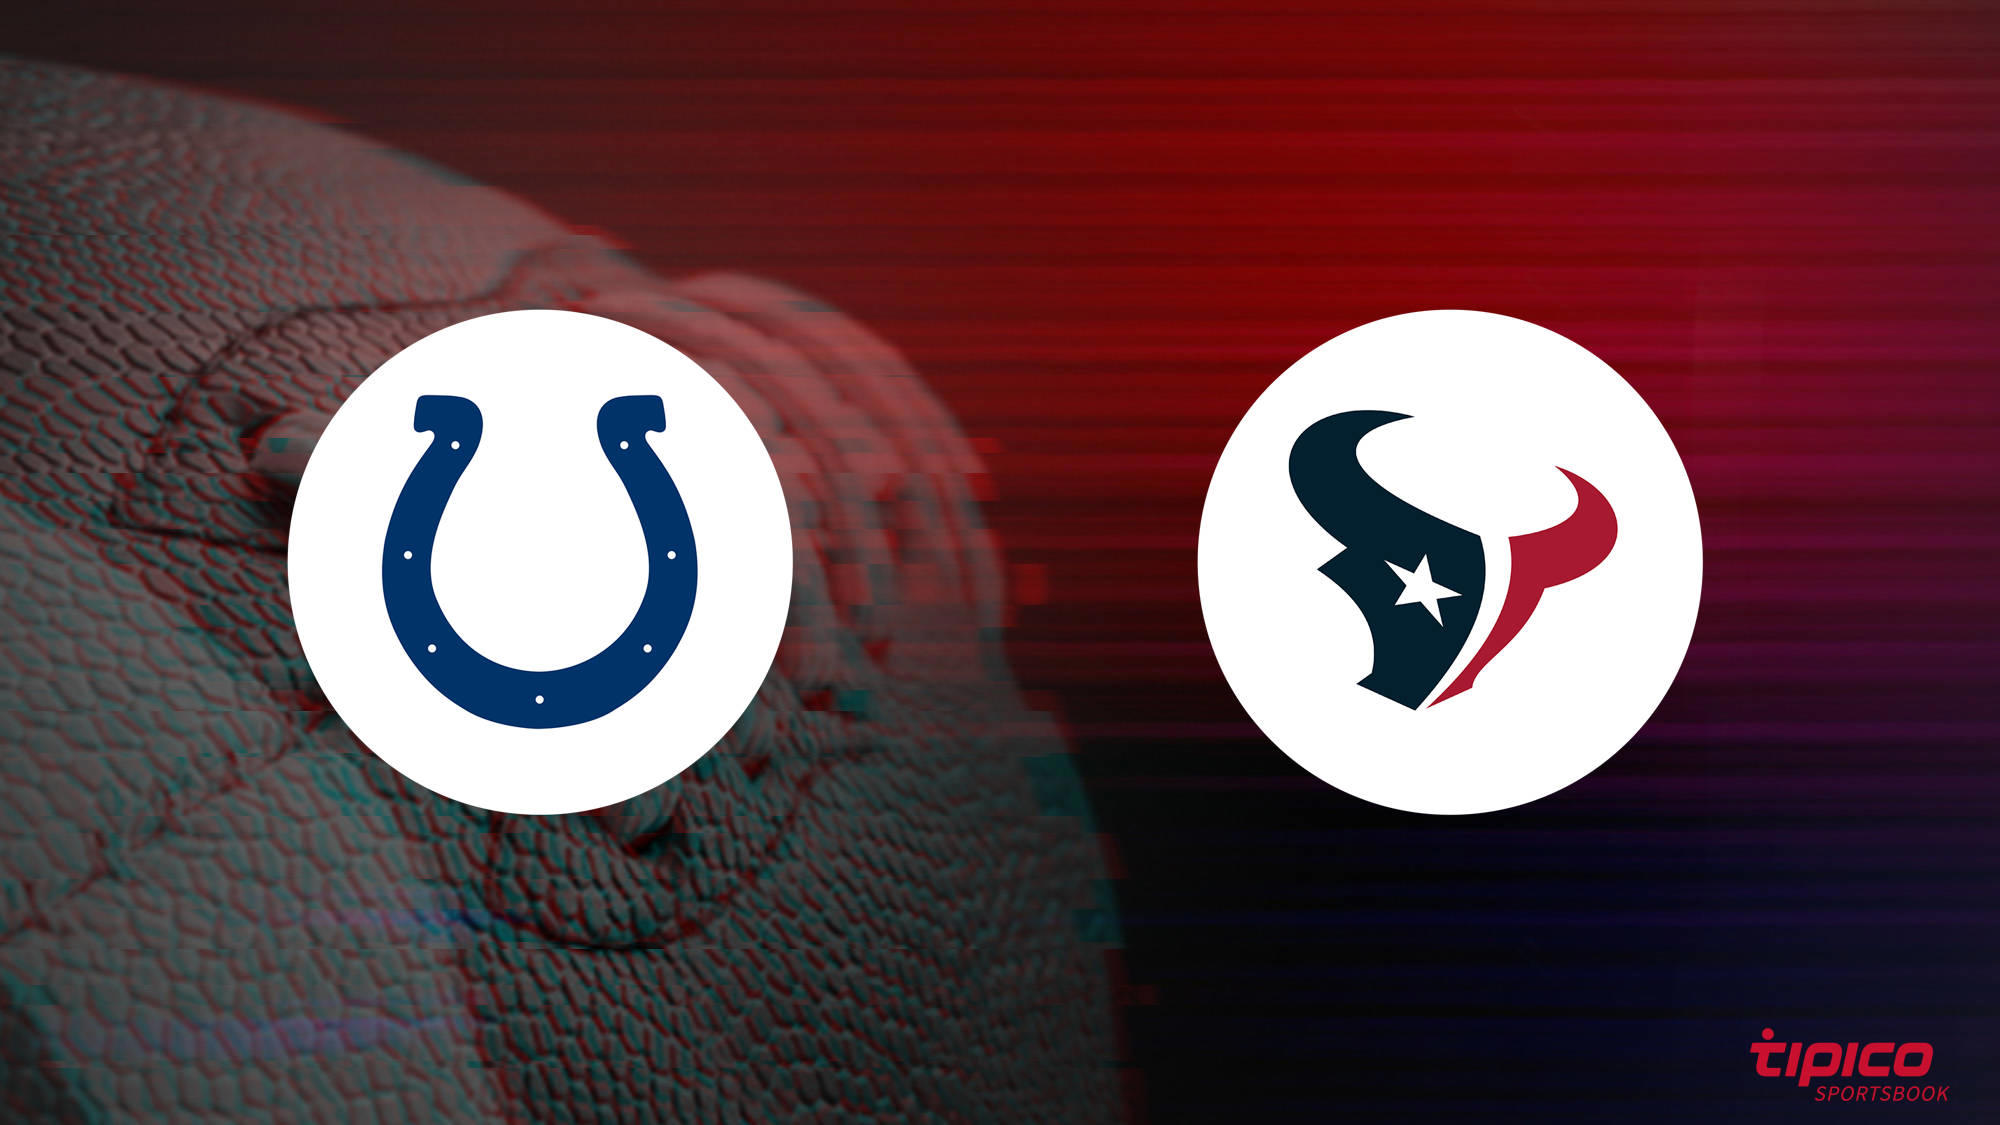 Indianapolis Colts vs. Houston Texans Preview